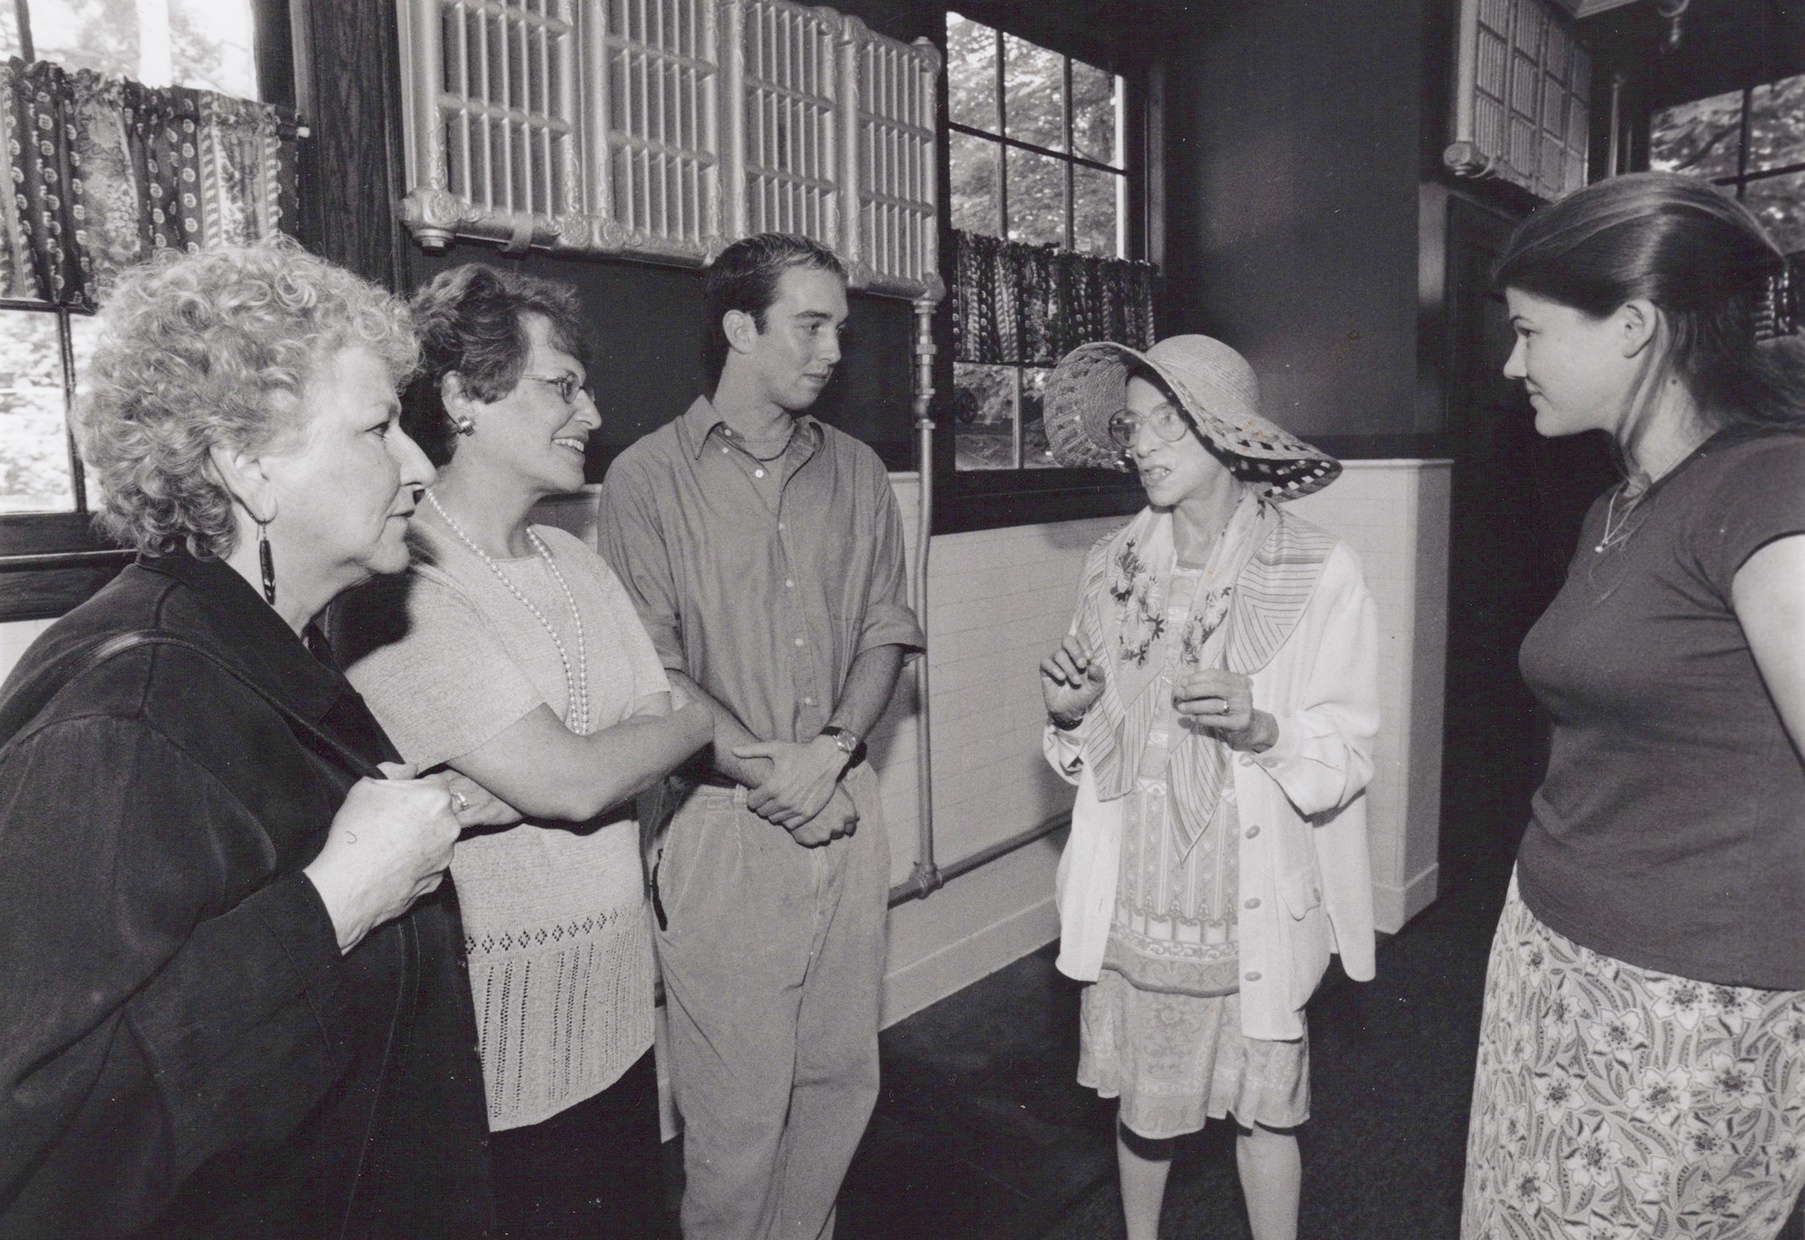 A black and white photograph of an older, light-skinned woman in a large hat talking to a group of people, two older women and two younger people.